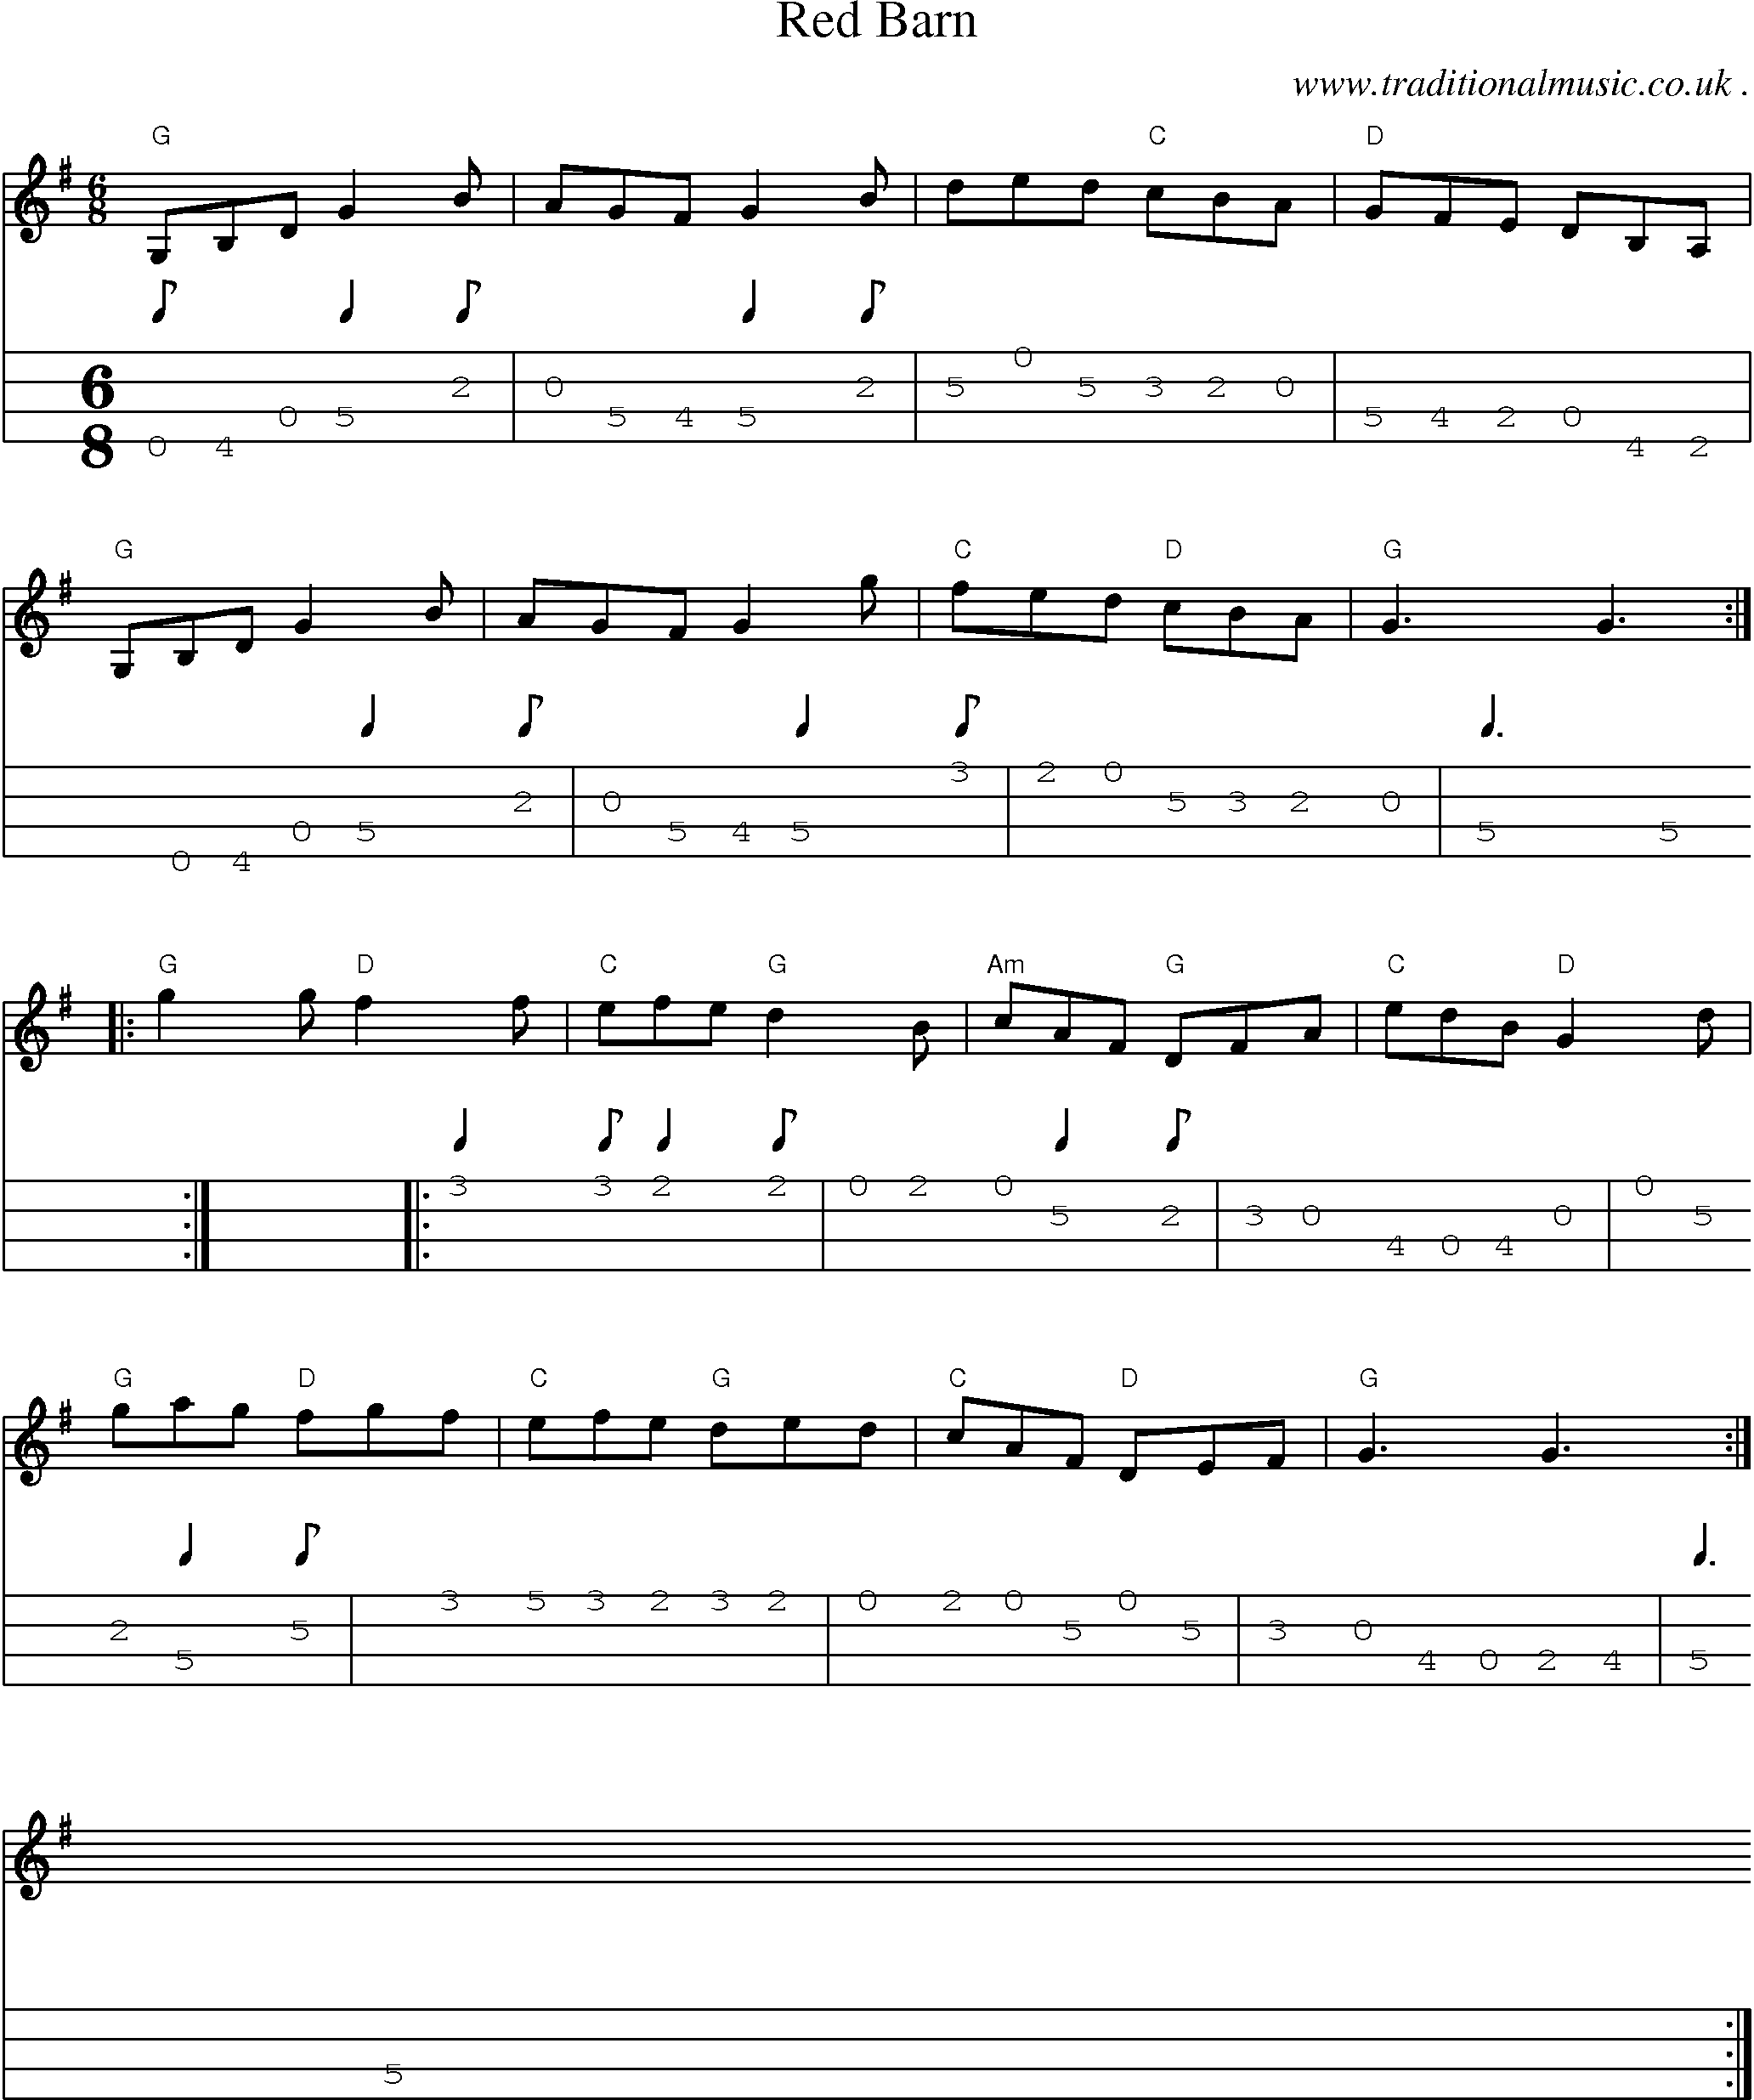 Sheet-music  score, Chords and Mandolin Tabs for Red Barn